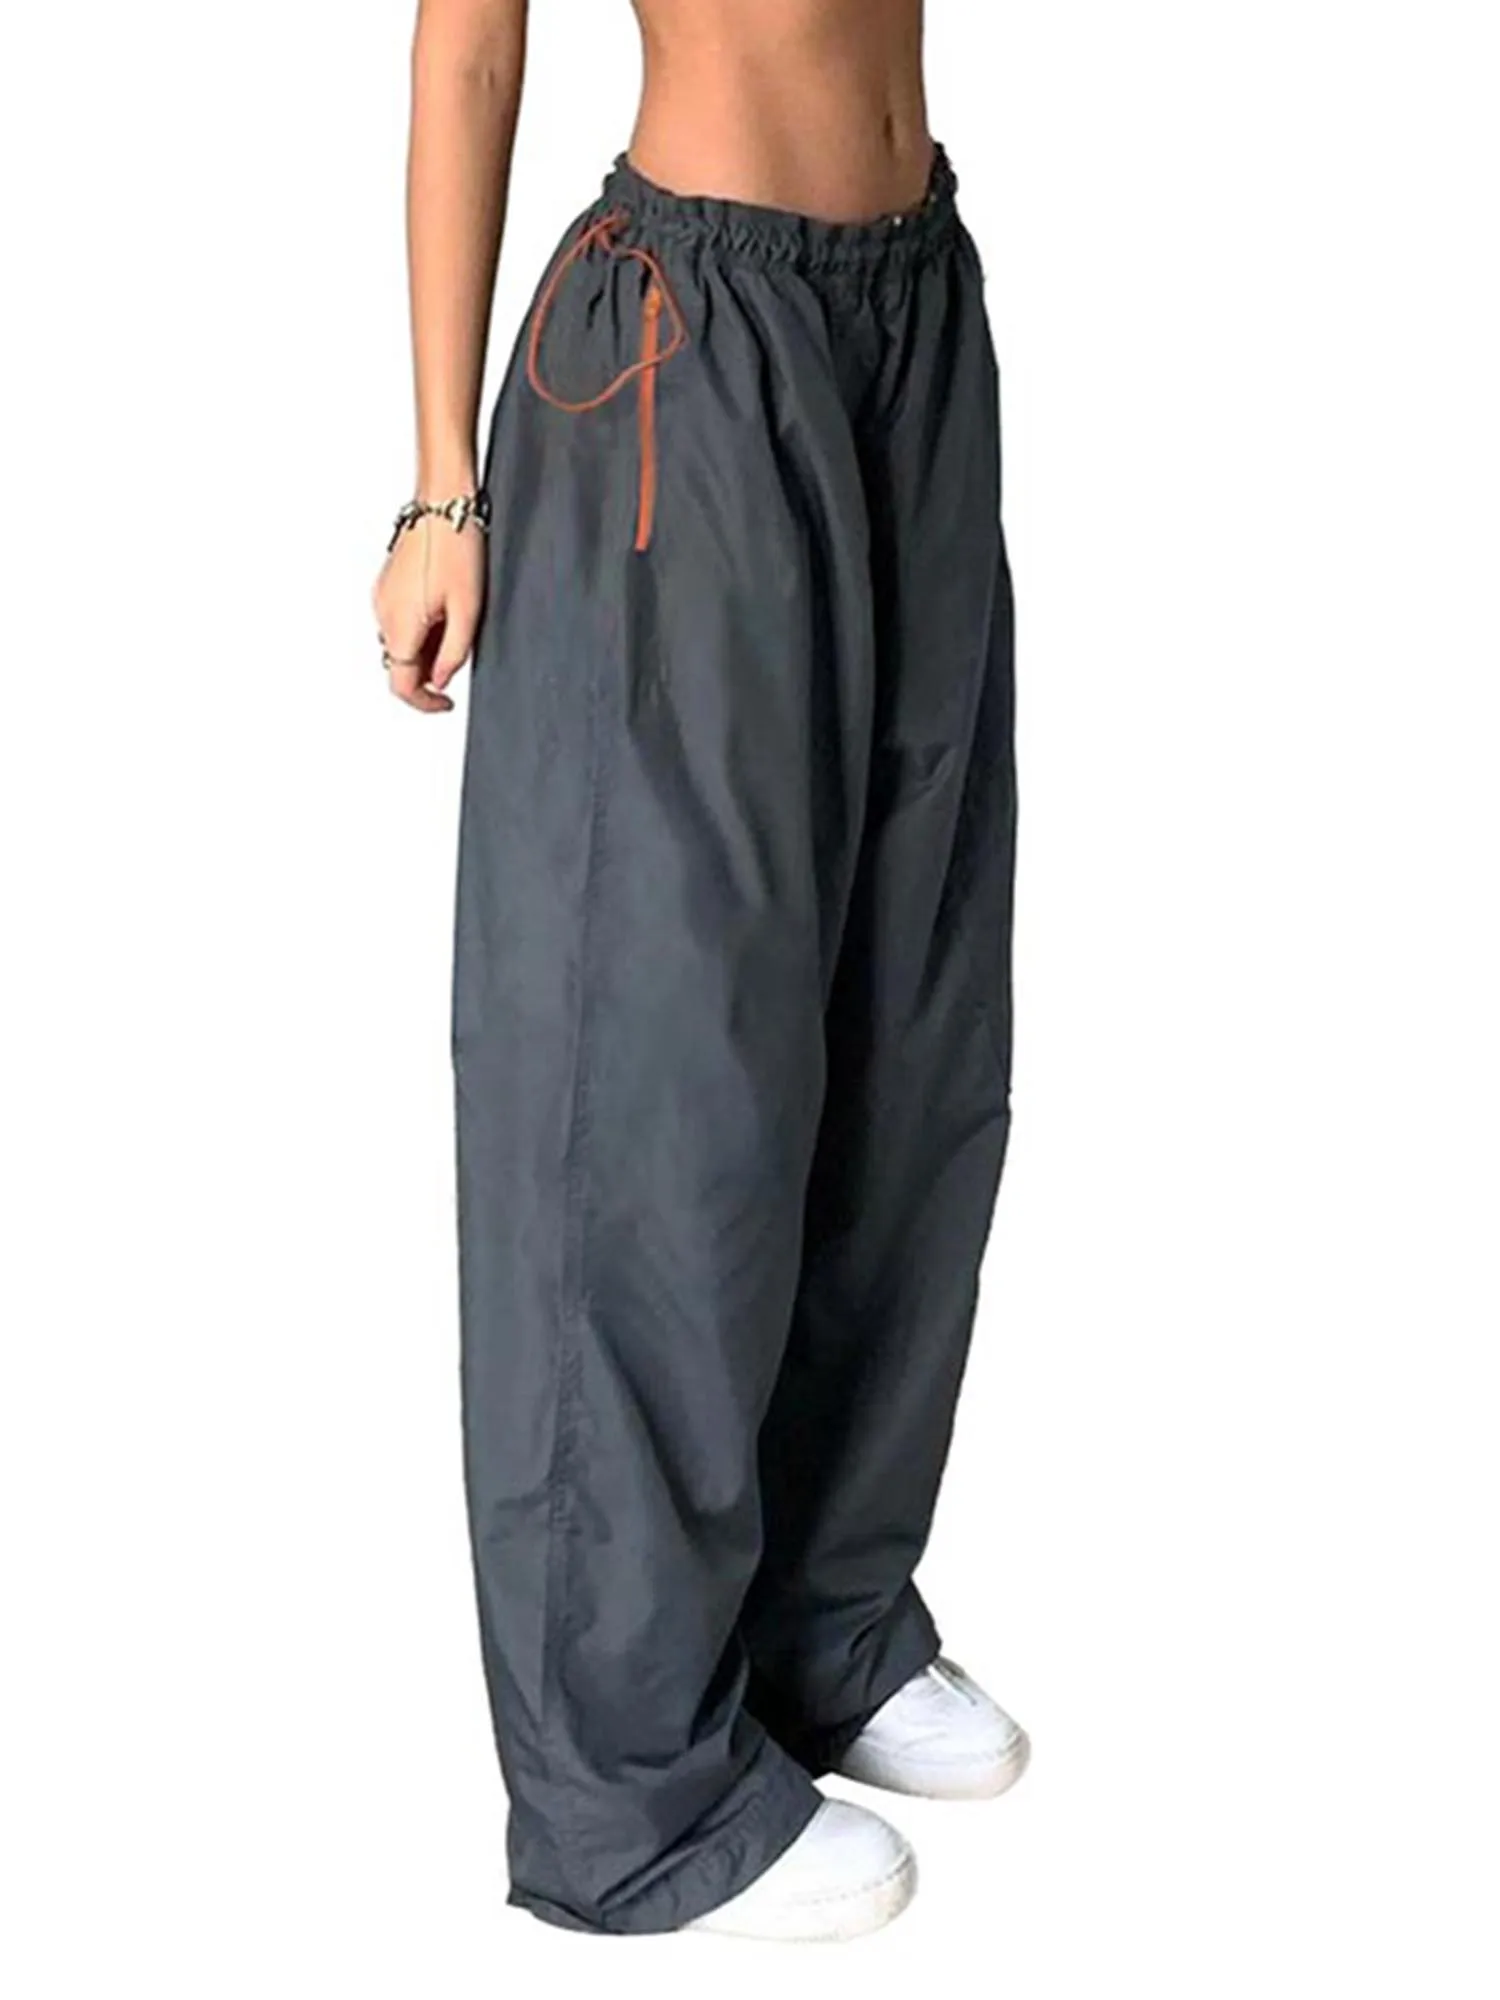 Loose Fit Cargo Sweatpants for Women with Drawstring Elastic Waist and Wide Leg Jogger Trousers - Casual Hip Hop Style Baggy